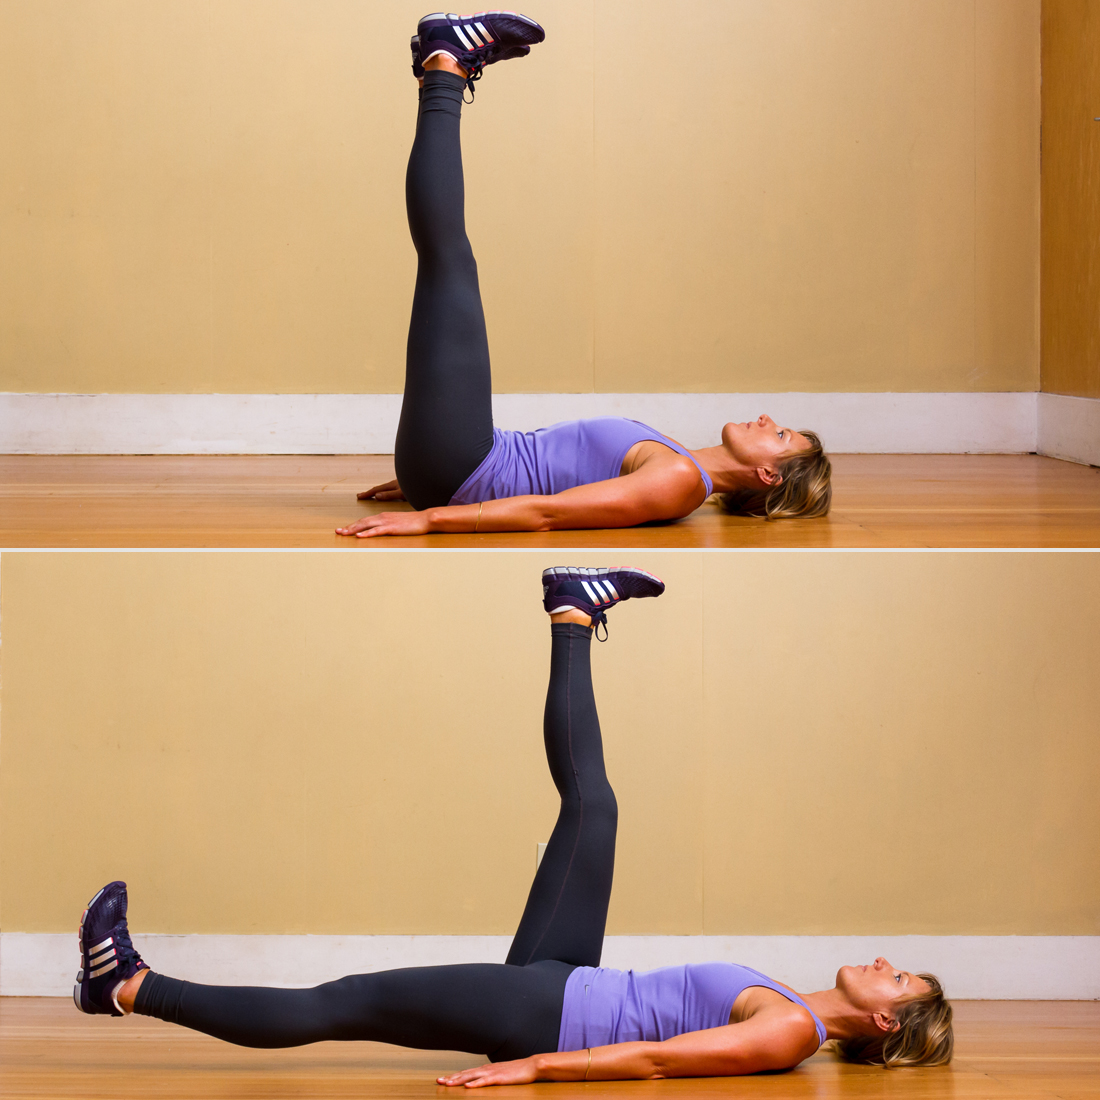 Scissor Abs | The Lazy Girl's Guide to Getting Toned | POPSUGAR Fitness ...